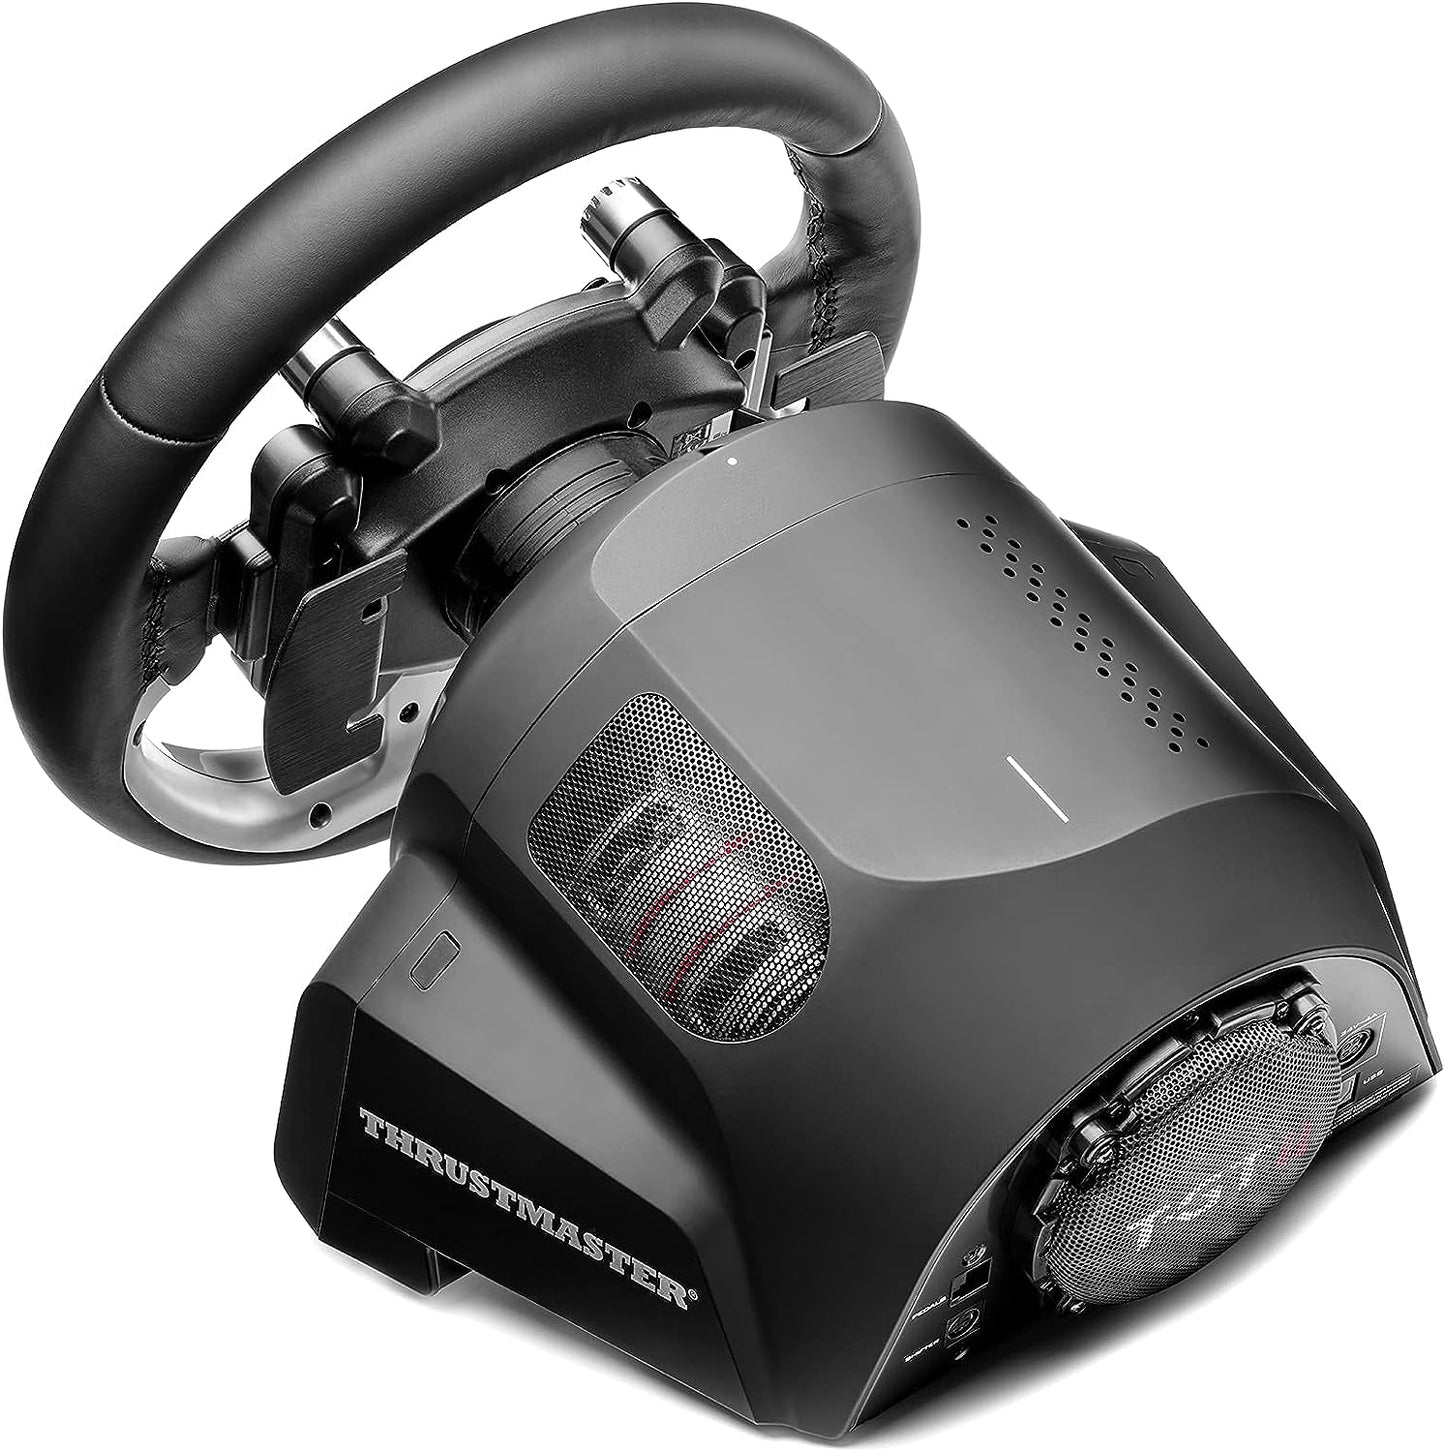 Thrustmaster T300RS GT Racing Wheel and 3 Pedals for PlayStation 4